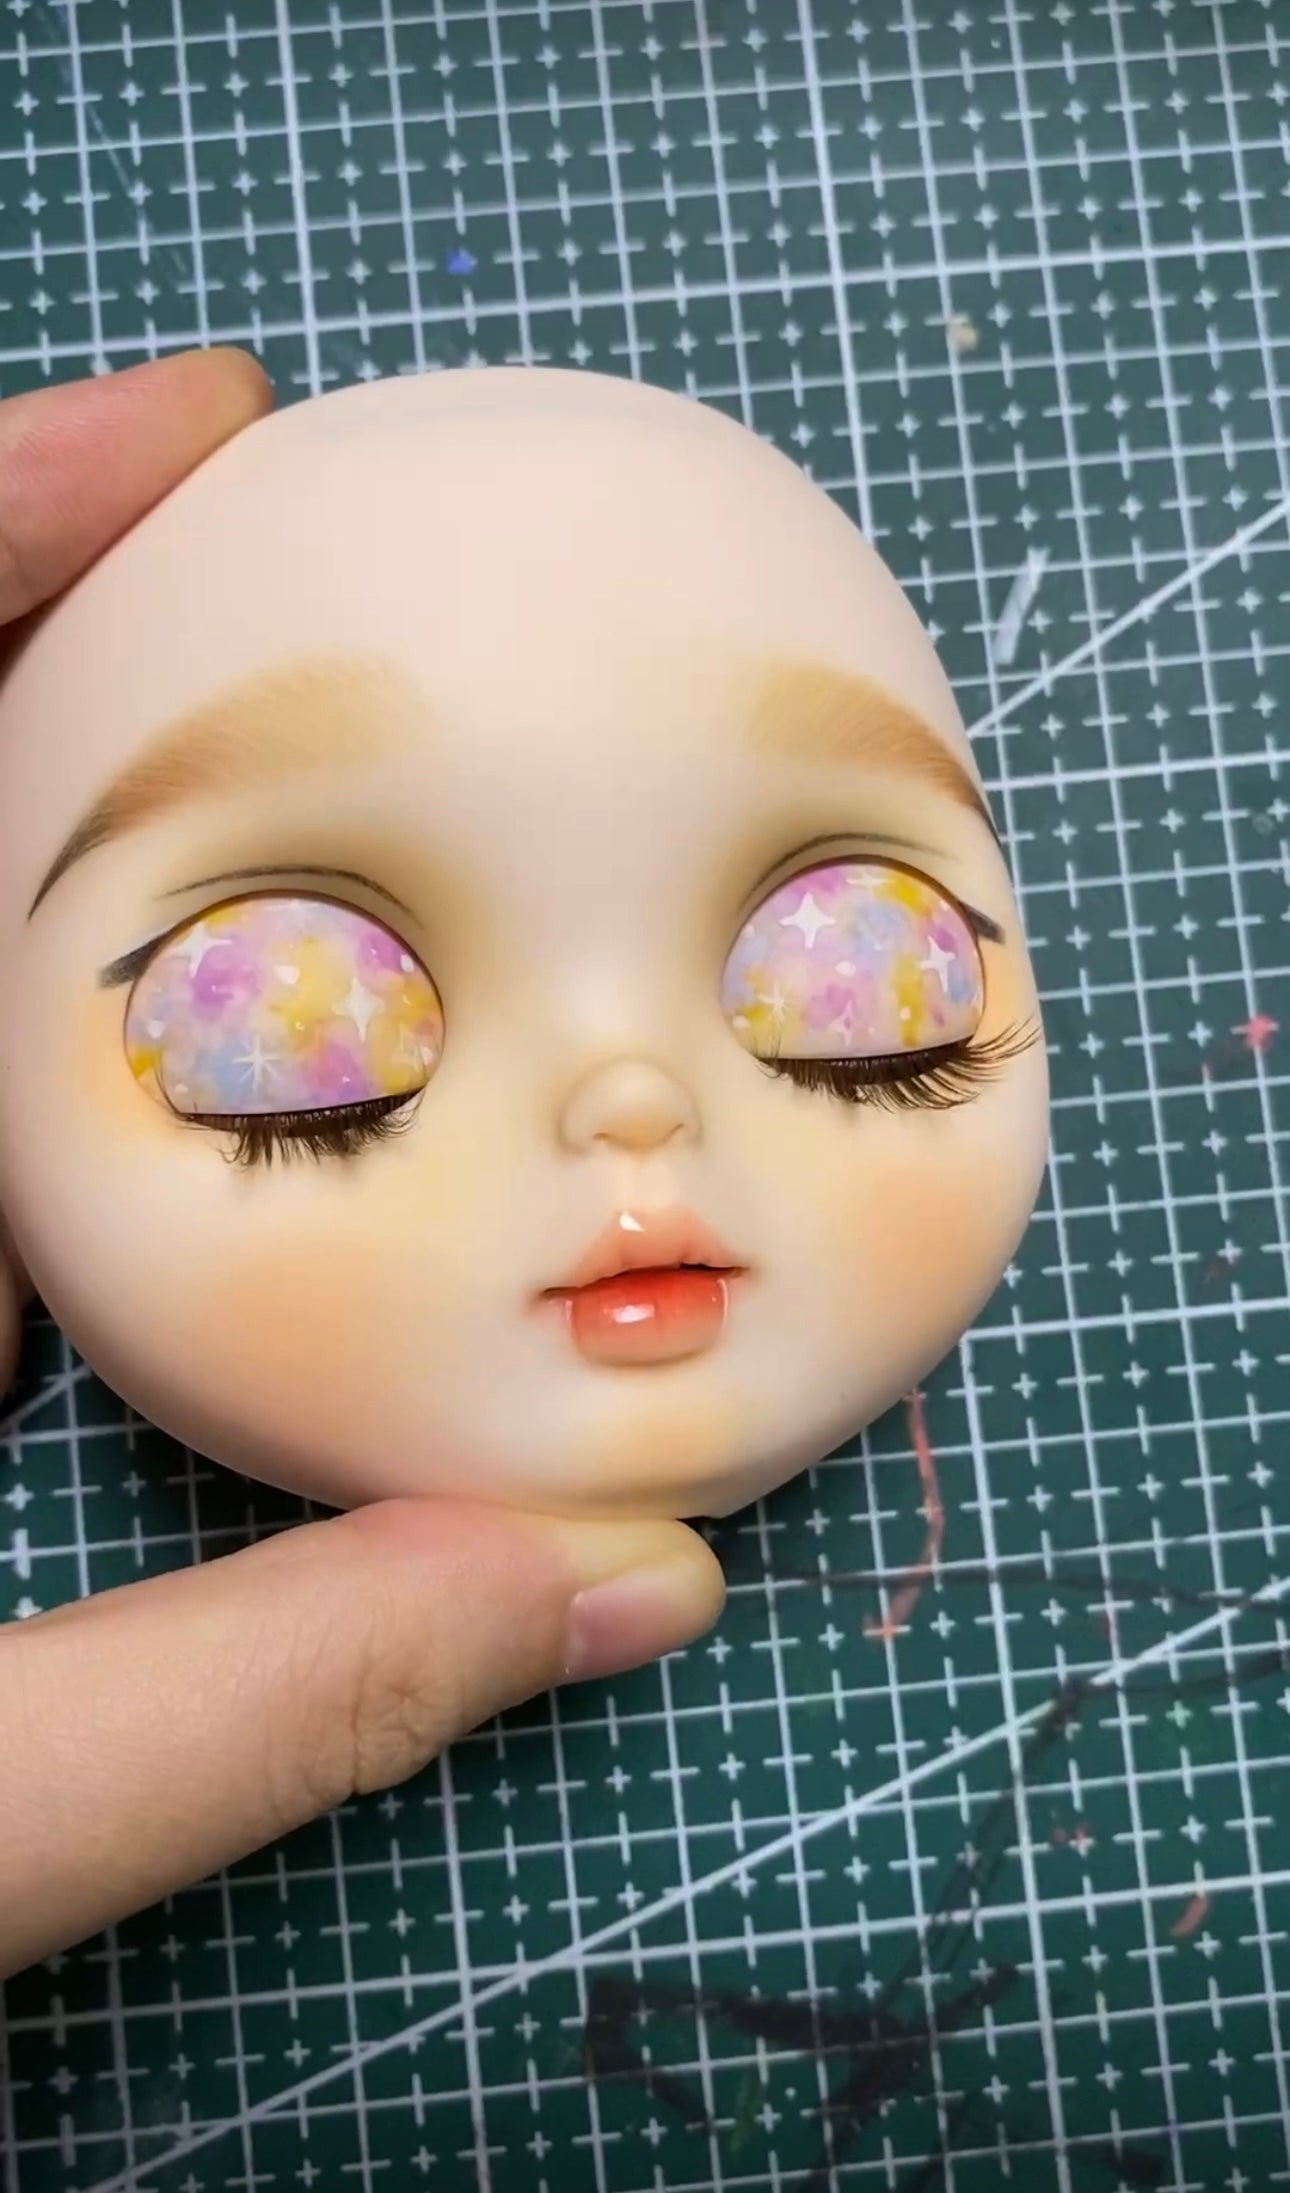 Blythe Doll Custom Faceplate with Makeup(White Skin) -RBL 09